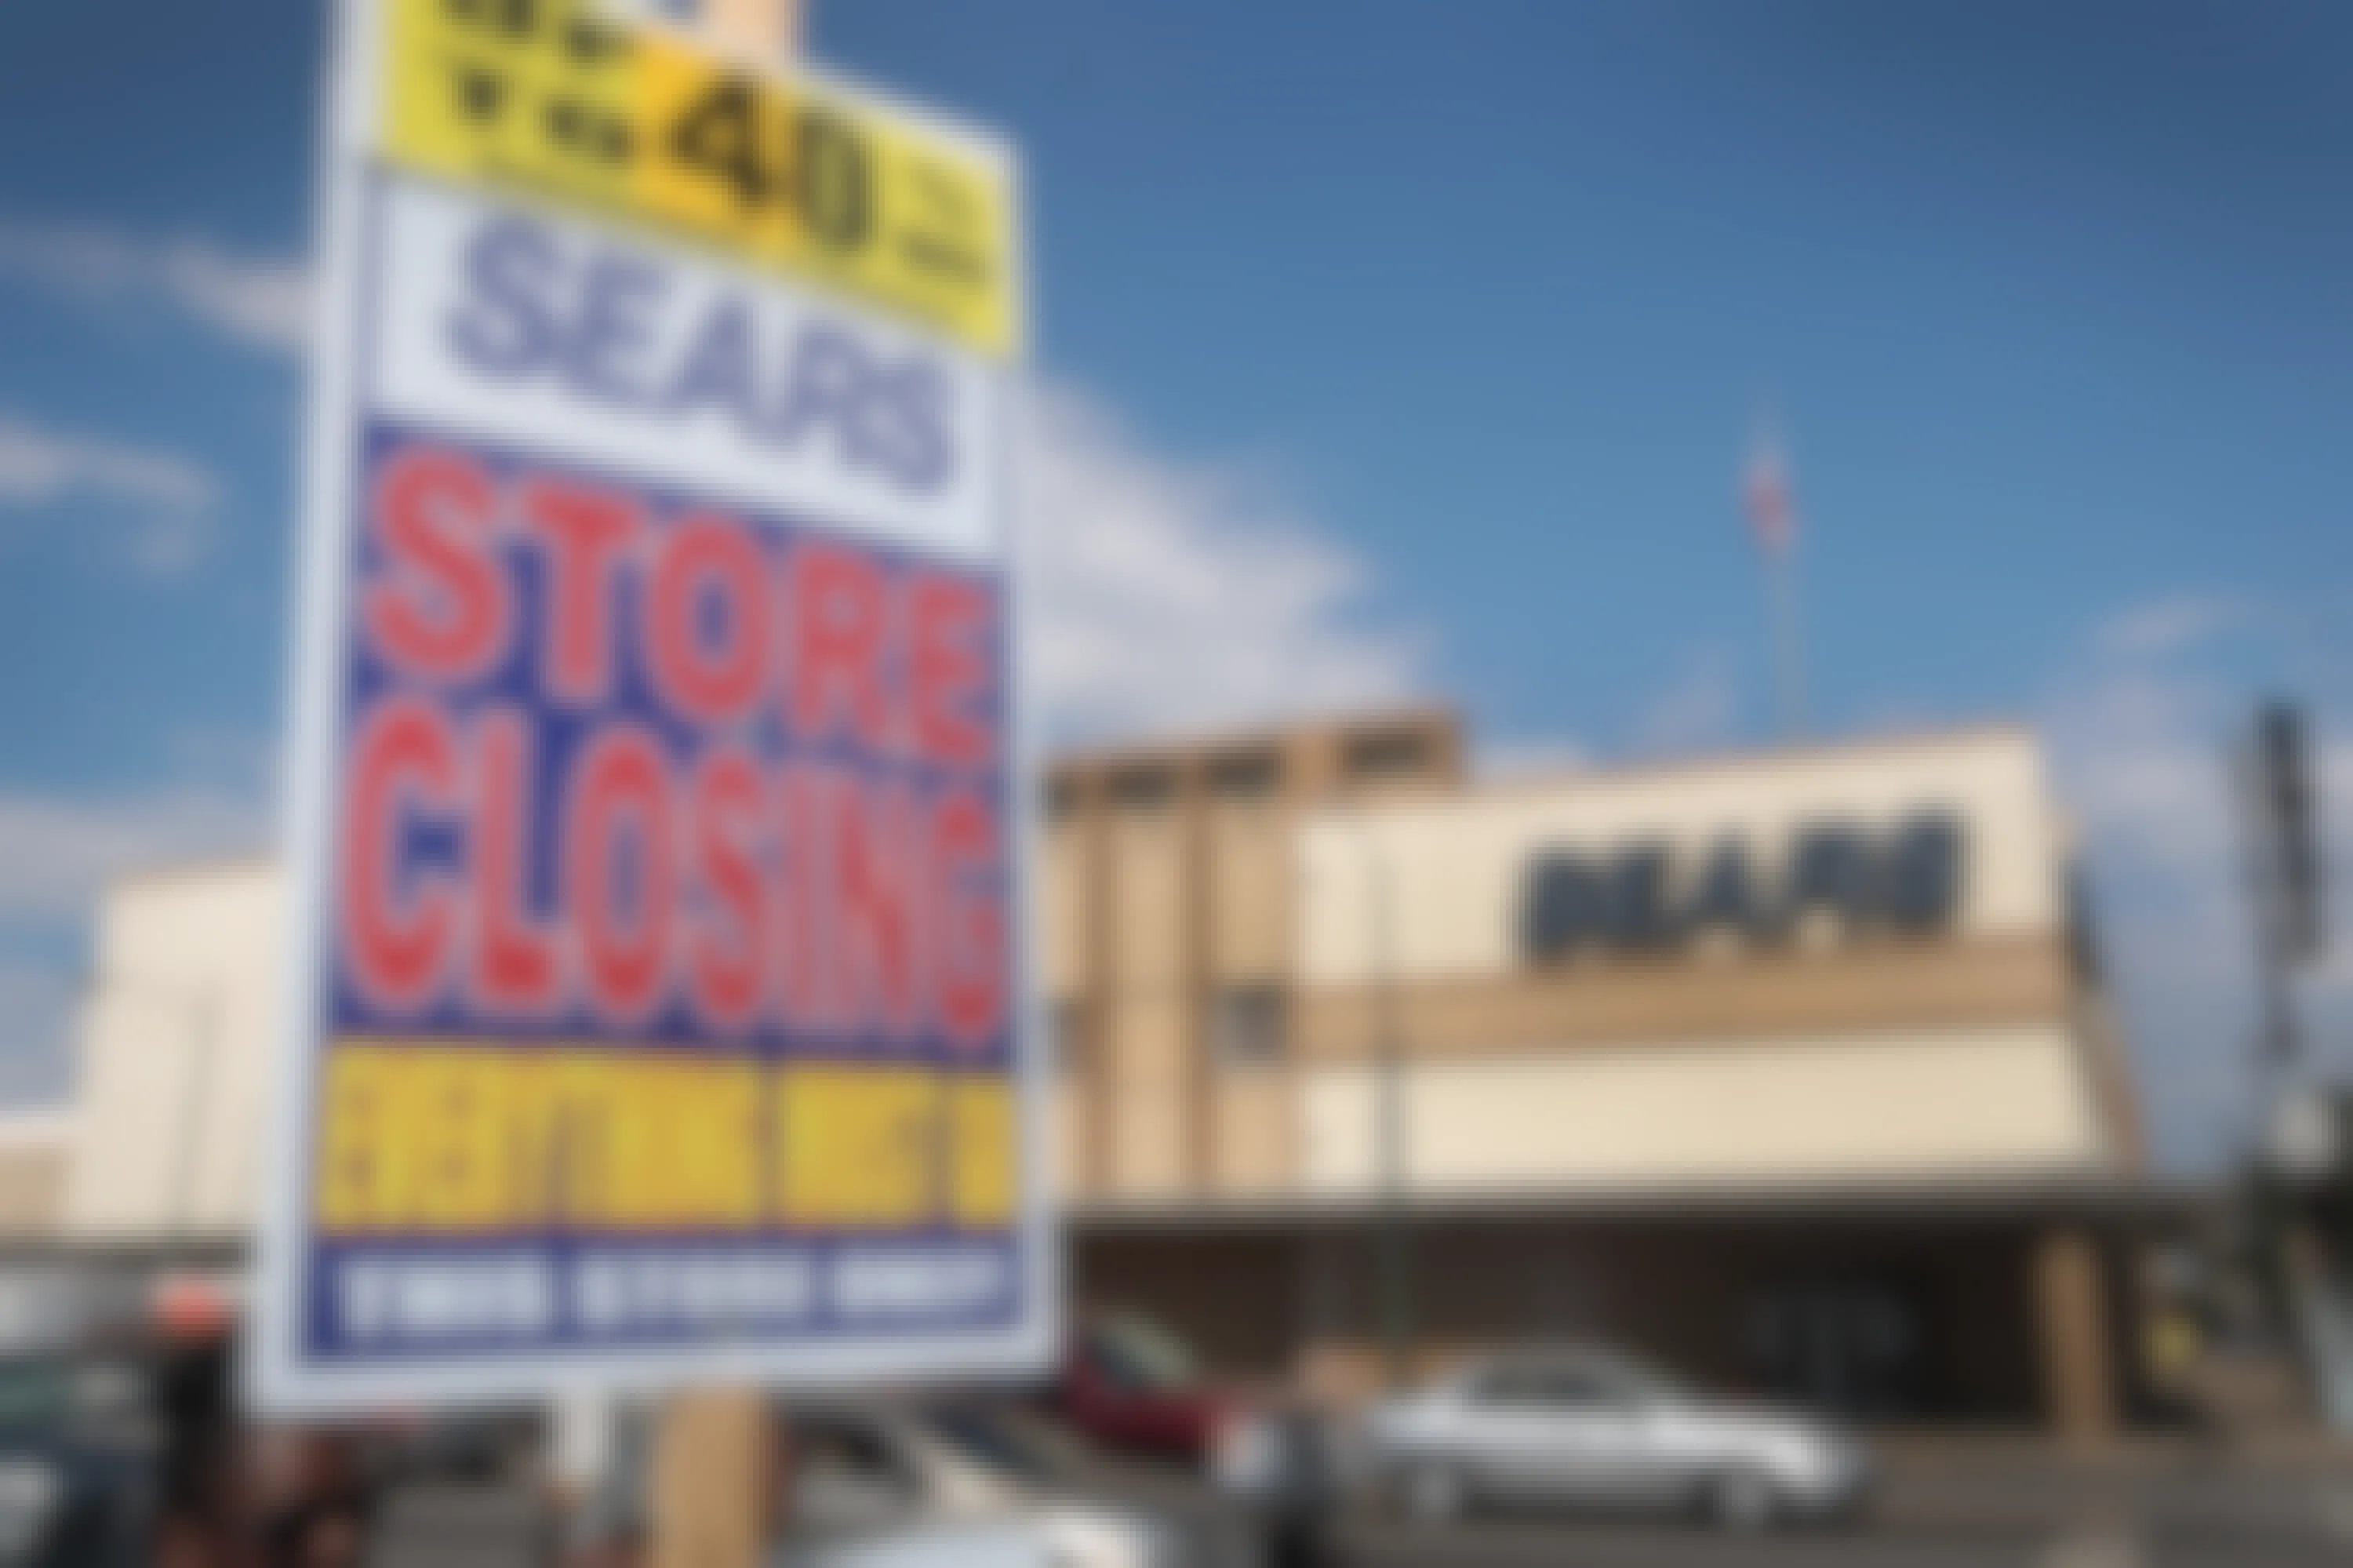 Sears, Store Closing sign outside in front of a Sears location.